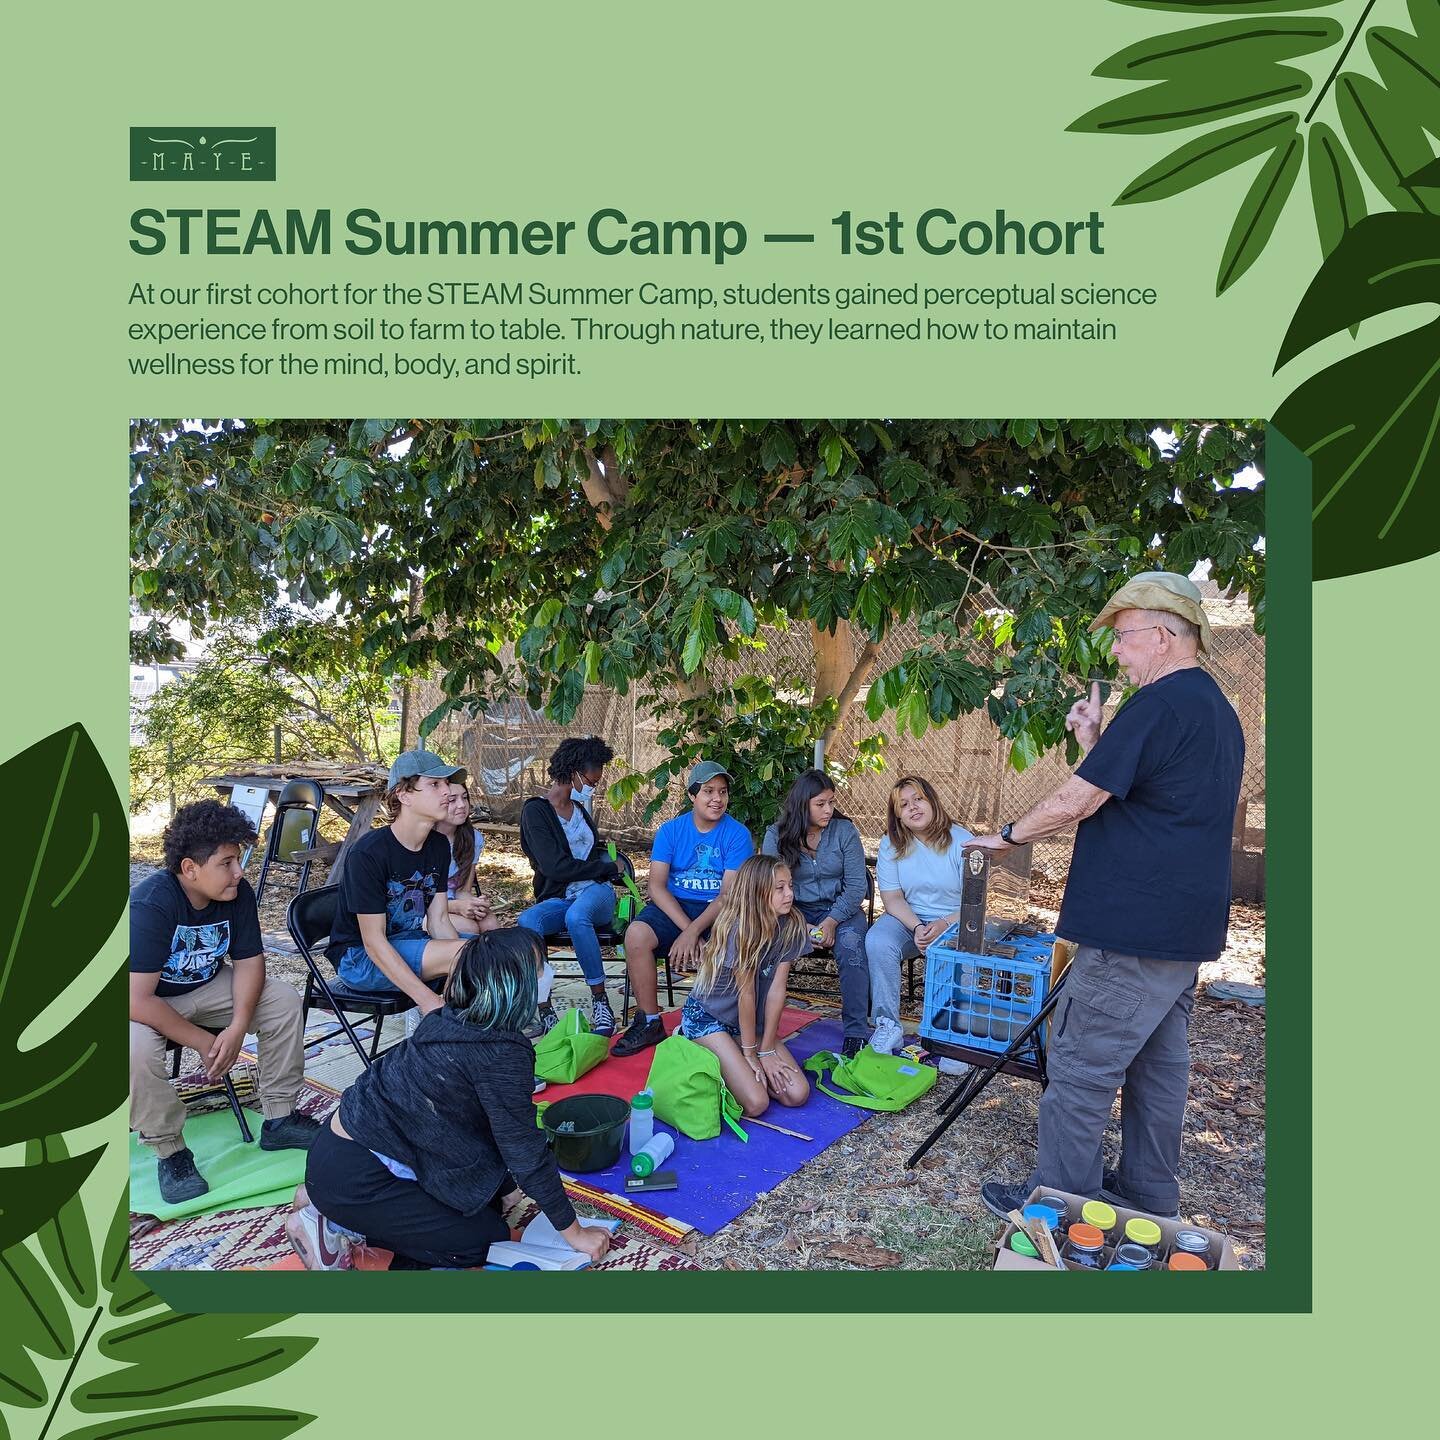 🌈 Take a look at our first cohort for the free STEAM Summer Camp! 

🌳 Students gained perceptual science experience from soil to farm to table. Through nature, they learned how to maintain wellness for the mind, body, and spirit. 

🎨 The Summer Ca